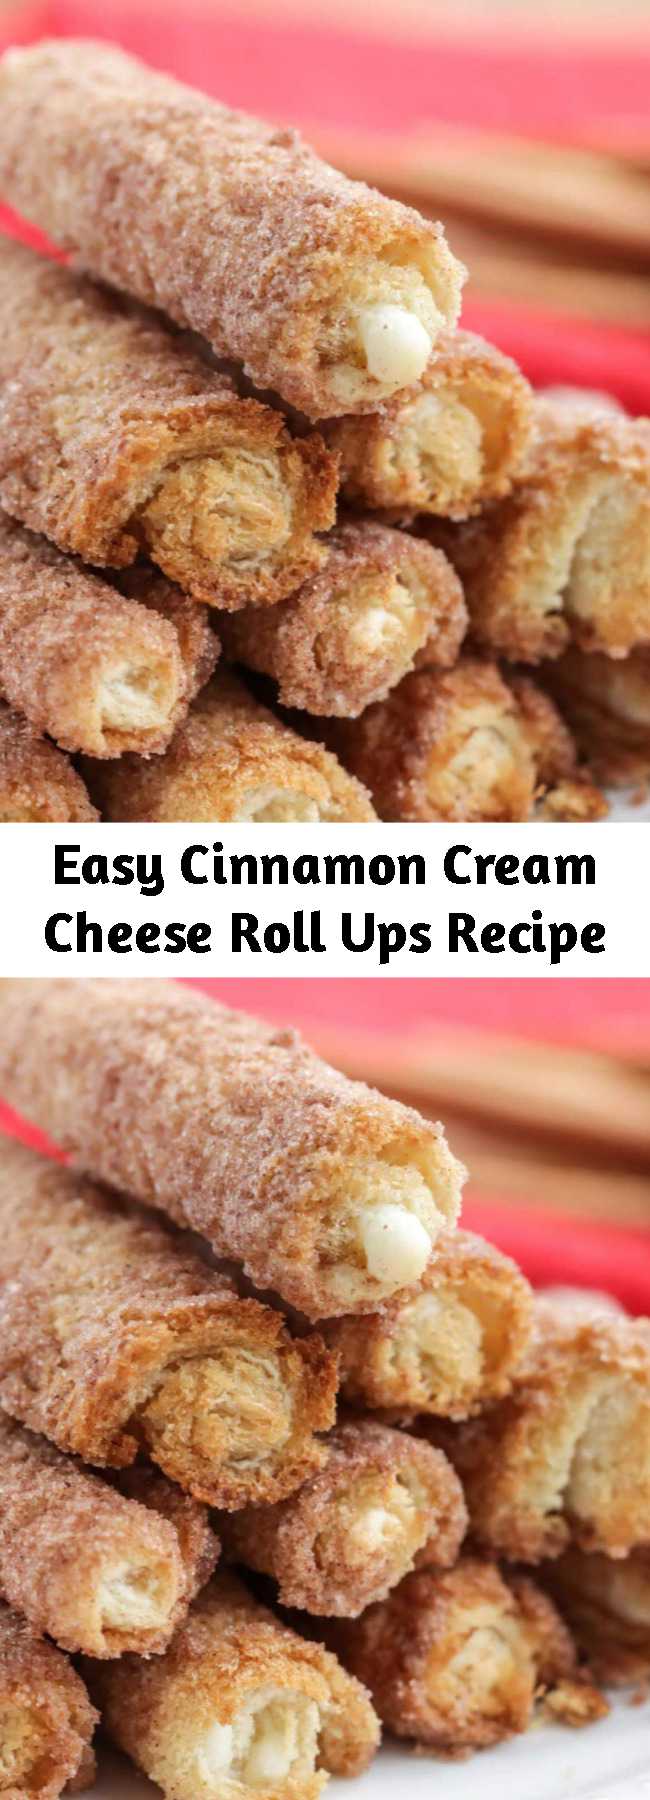 Easy Cinnamon Cream Cheese Roll Ups Recipe - Delicious Cinnamon Cream Cheese Roll-Ups - a simple and yummy breakfast treat. White bread flattened and rolled with a cream cheese and powdered sugar mixture, dipped in butter, cinnamon, and sugar!